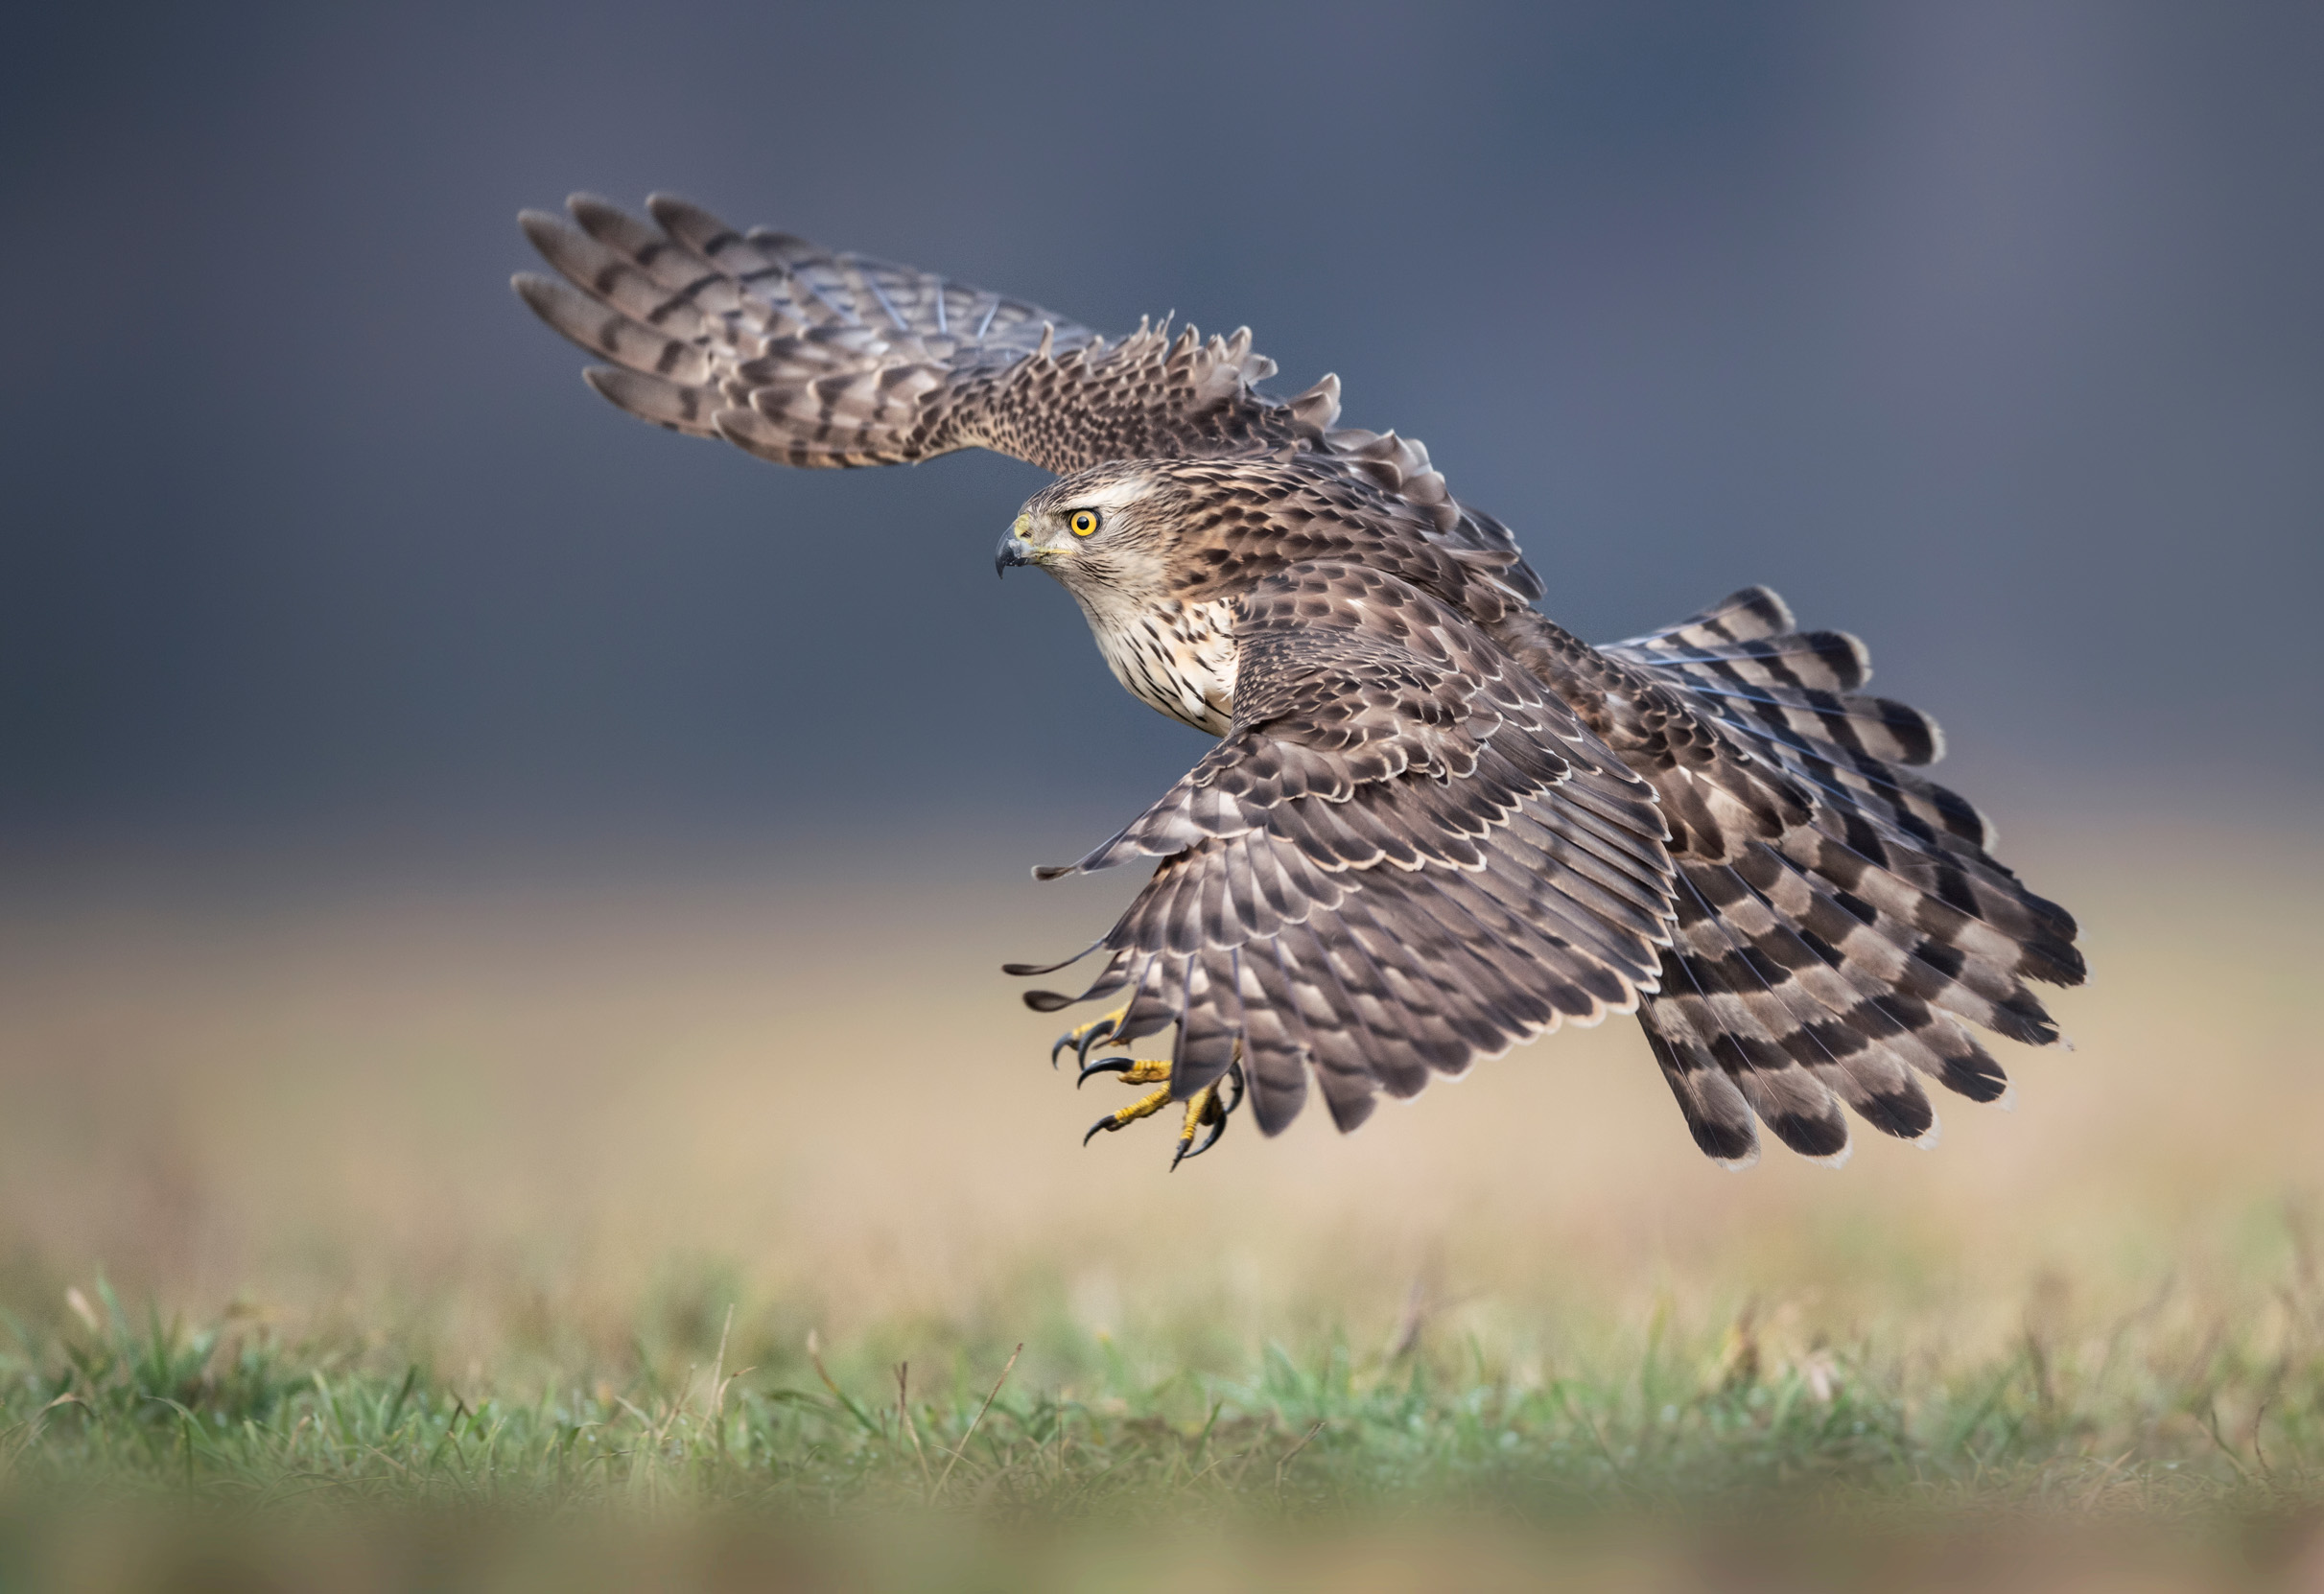 A close-up view of a juvenile Goshawk with its talons out, ready to land.